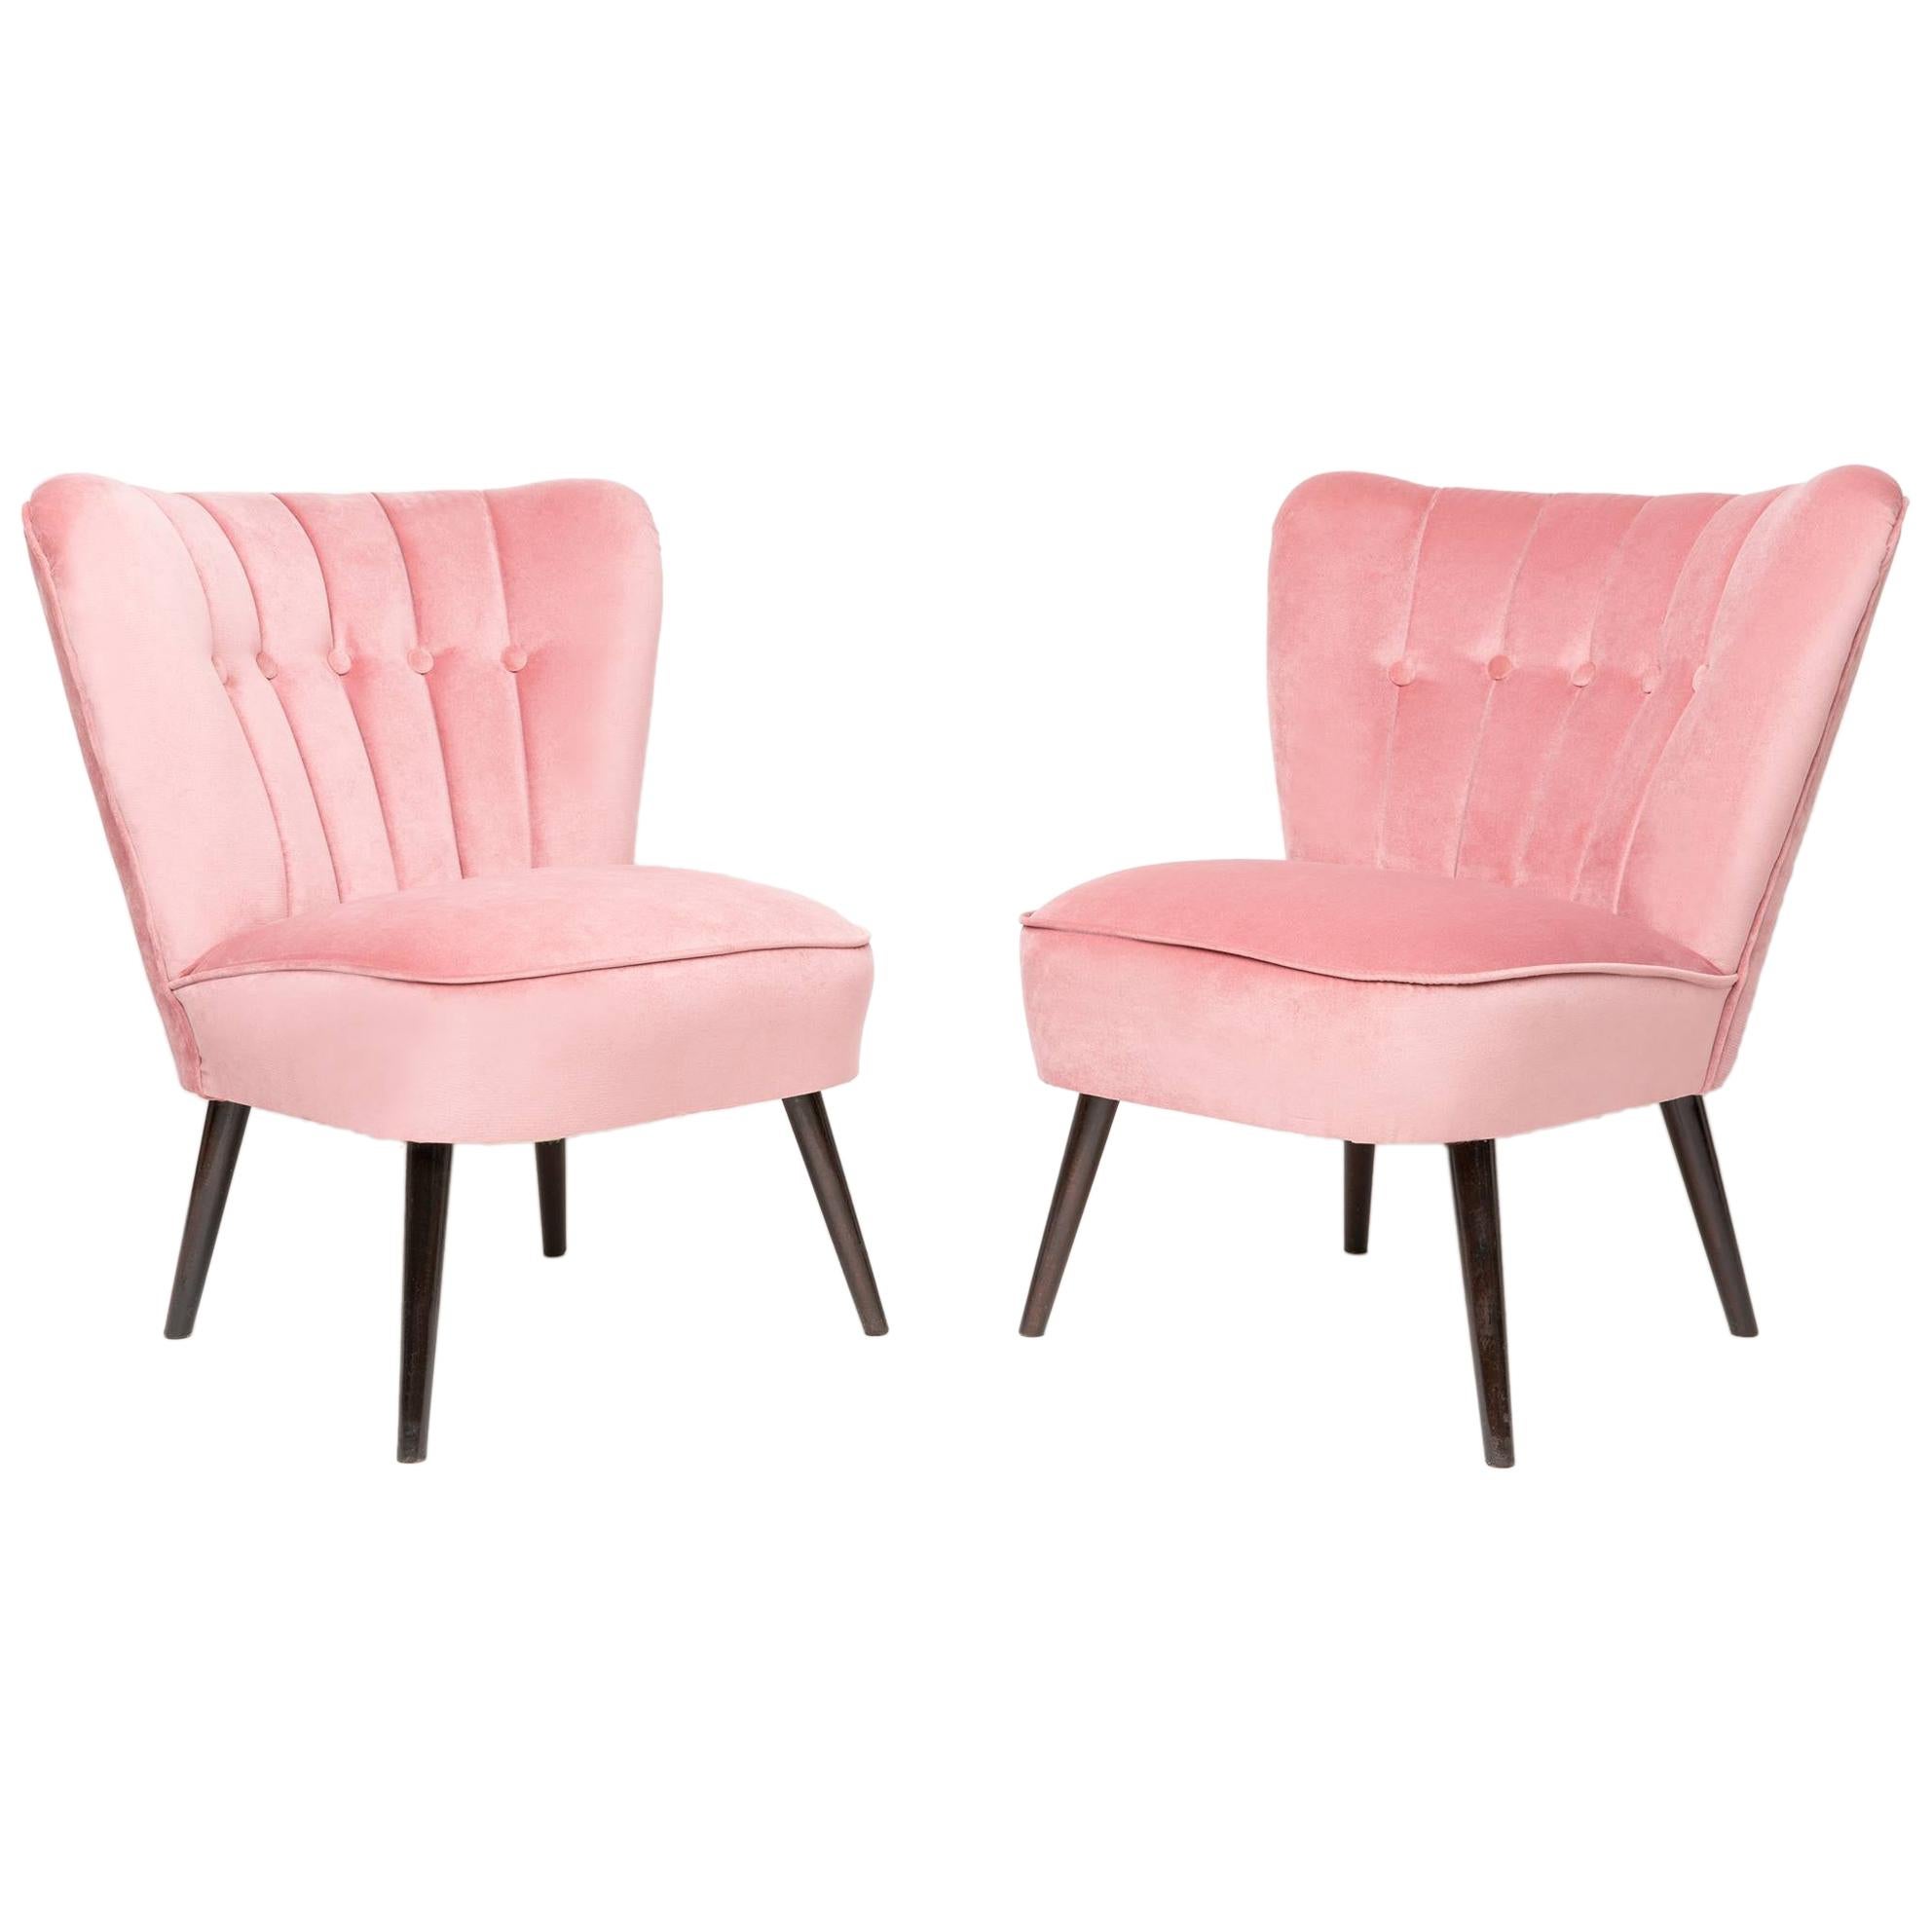 Set of Two 20th Century Pink Velvet Club Armchairs, Germany, 1960s For Sale